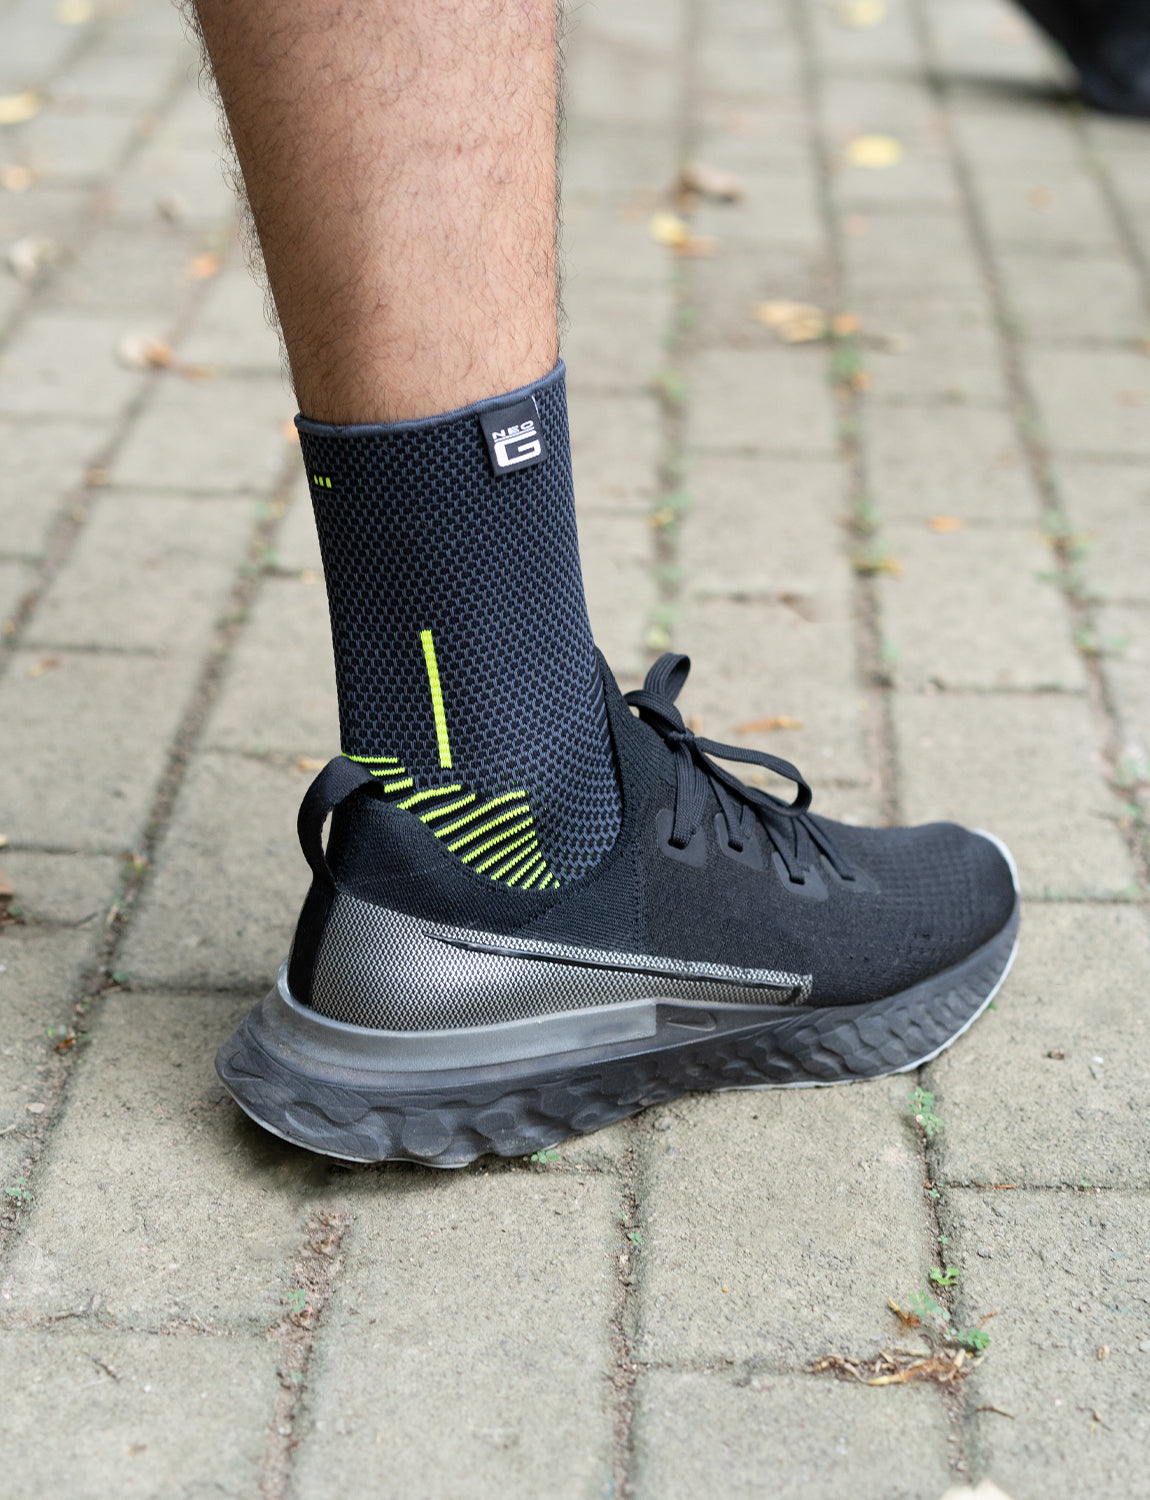 A close-up of a person's lower leg and foot wearing a Neo G USA Active Ankle Support with bright green detailing and breathable fabric, on a cobblestone path with scattered leaves.